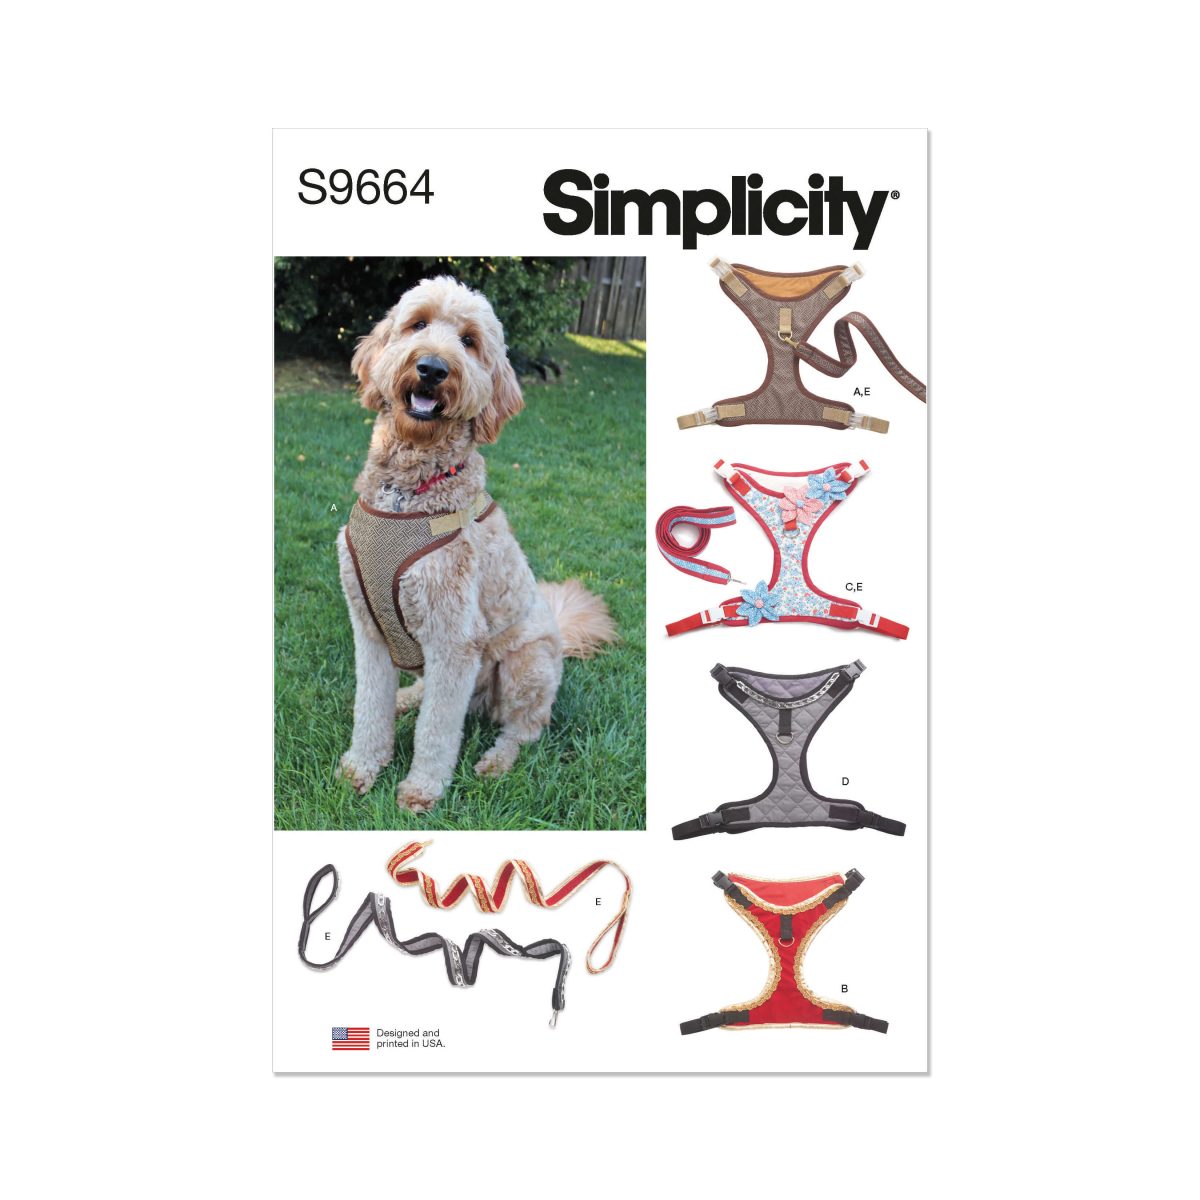 Simplicity Sewing Pattern S9664 Dog Harness and Leash with Trim Options